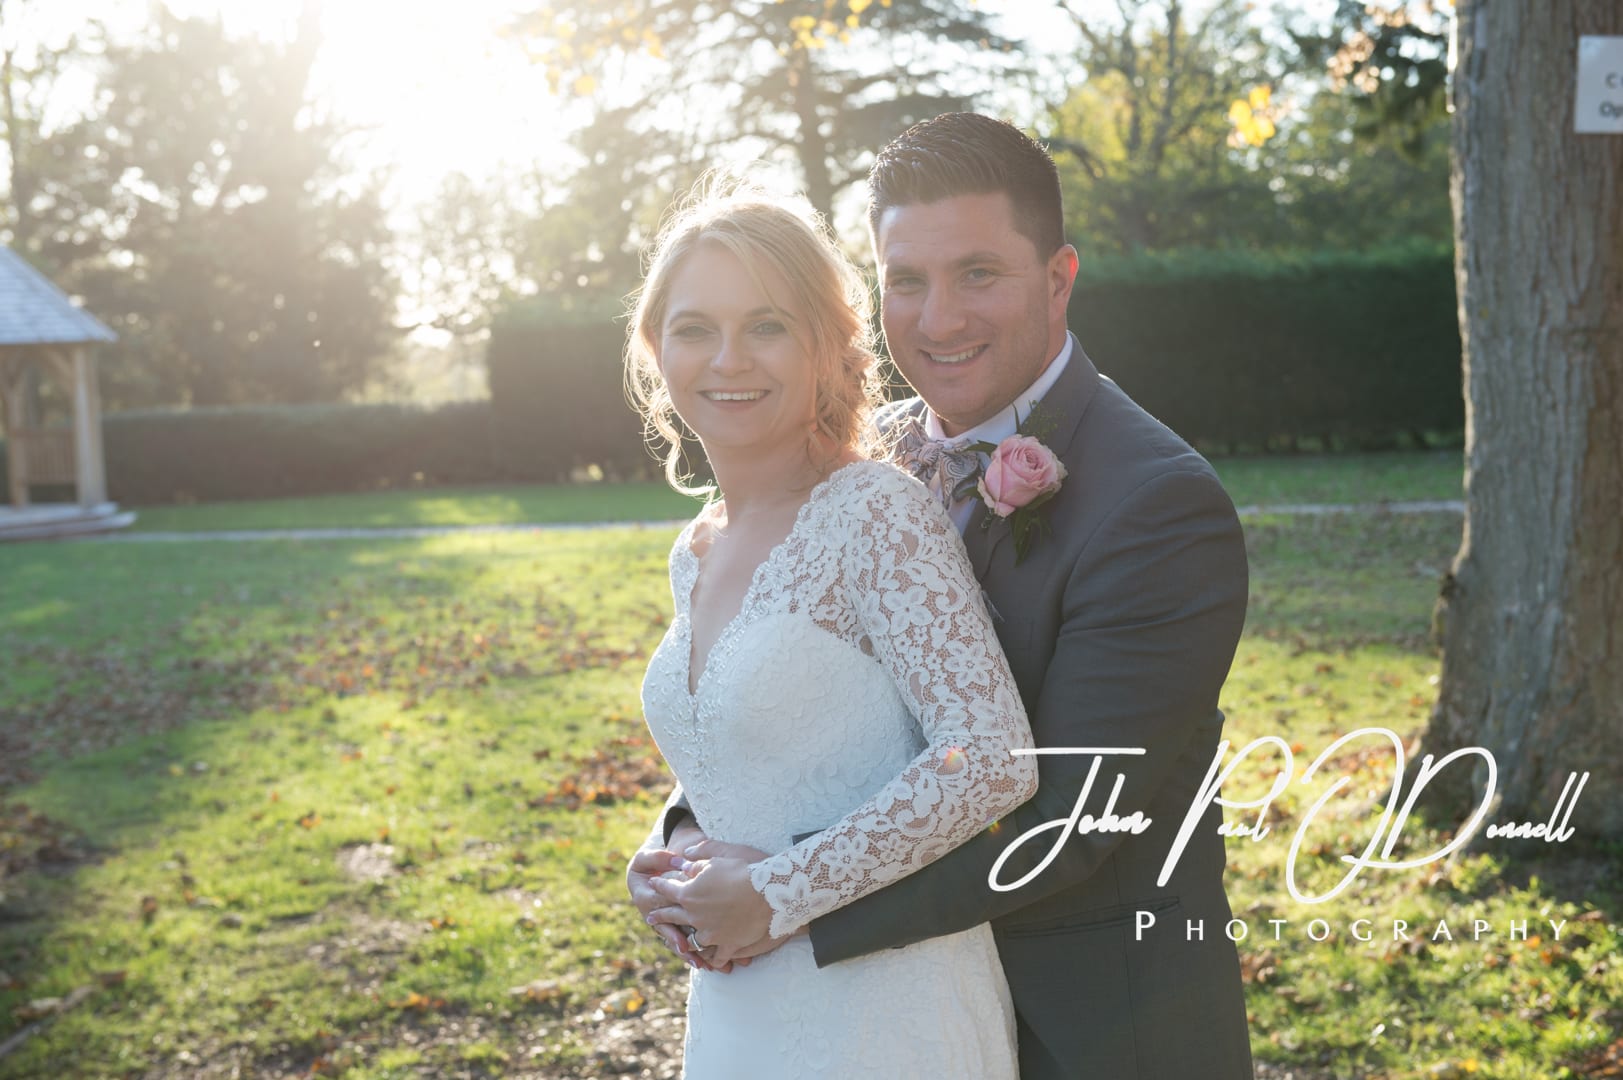 Hayley and Christophers Great Down Hall Wedding